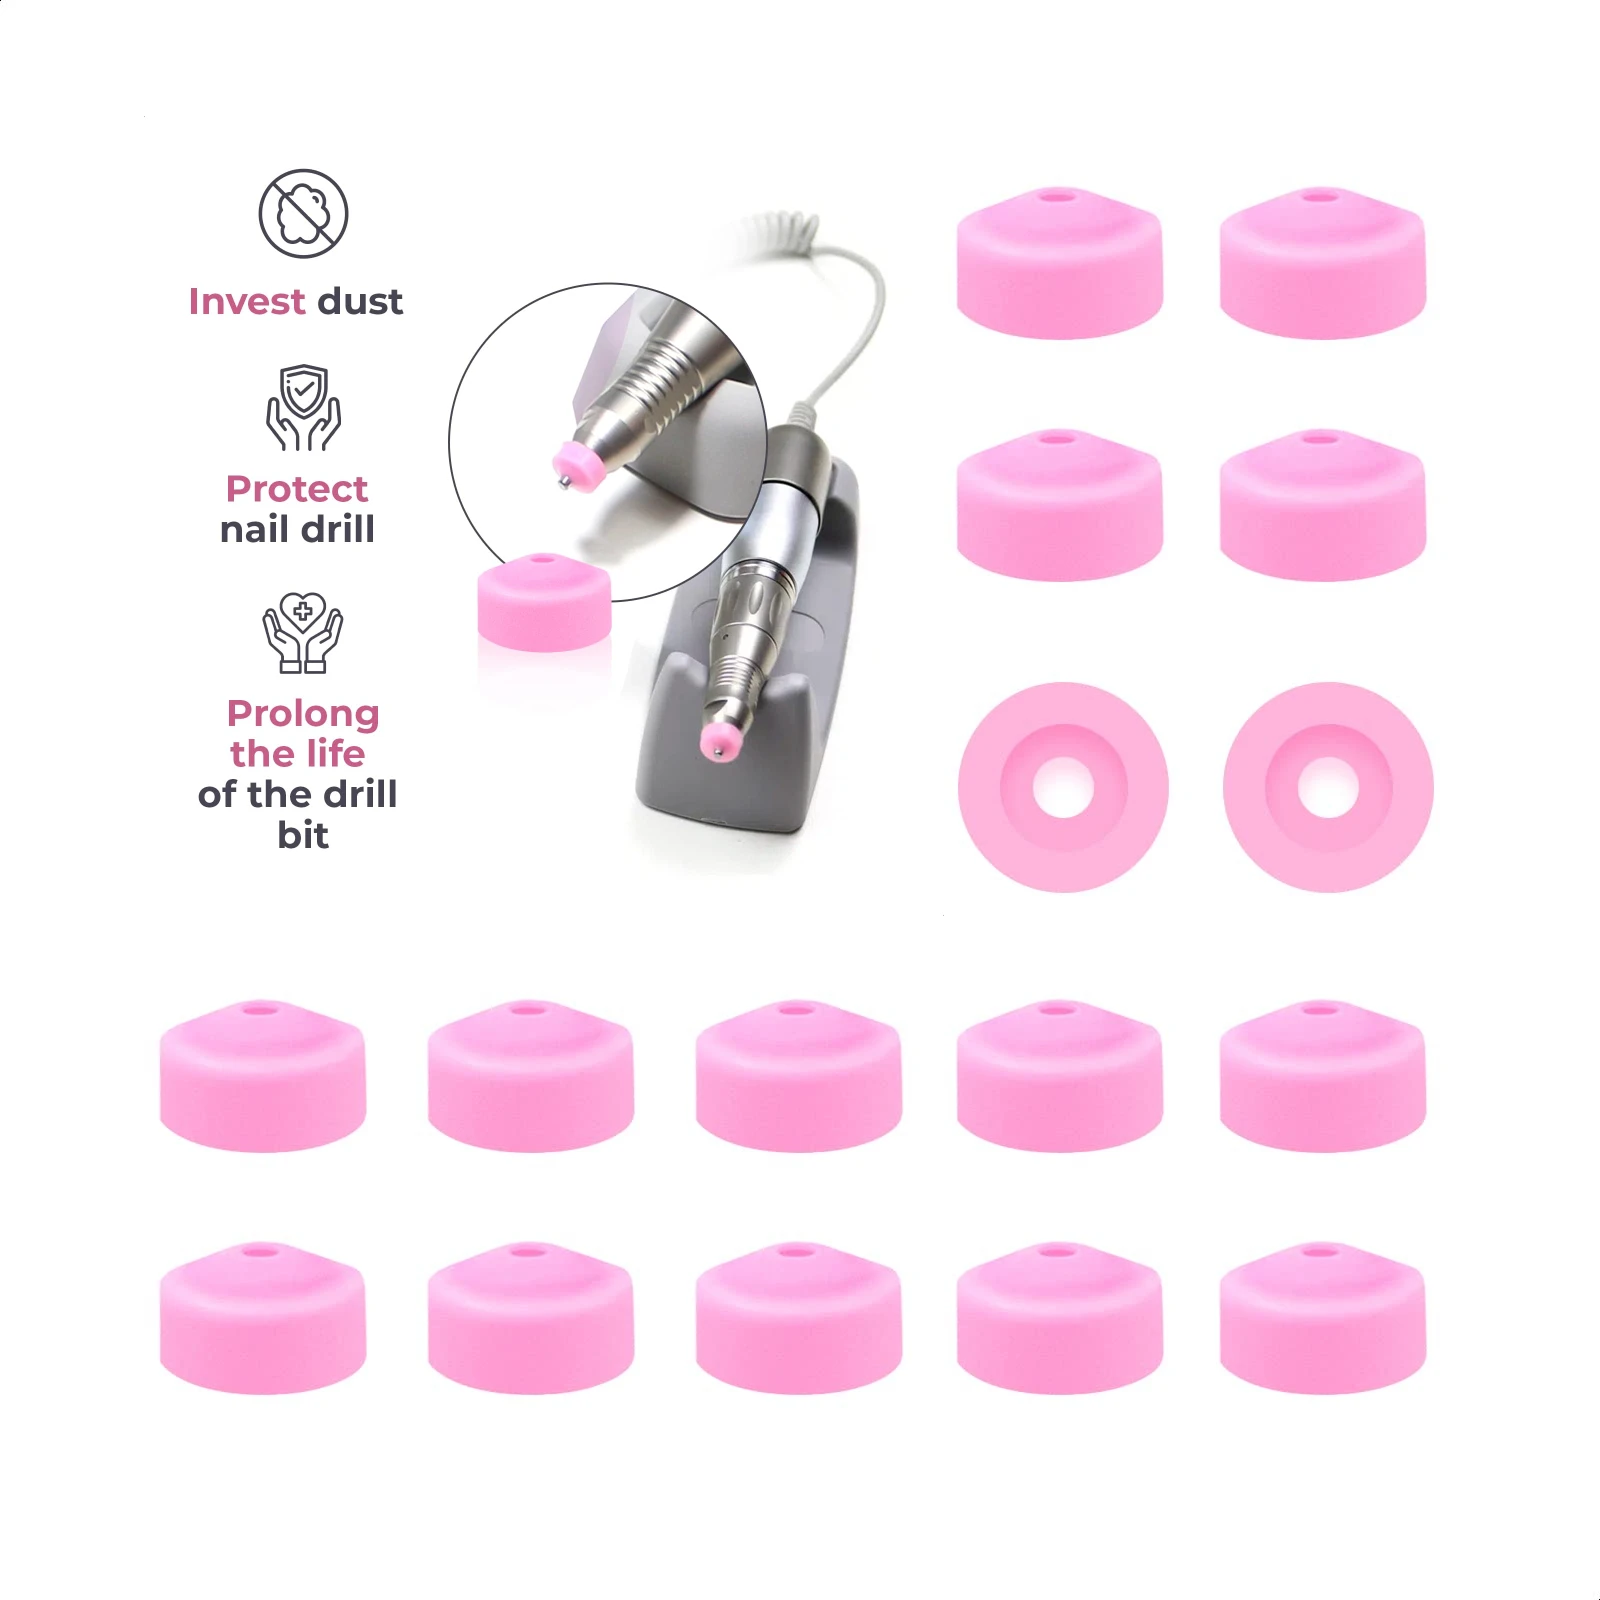 

10pcs Milling Cutter Protection Caps Pink Plastic Nail Dust Protector for 3/32" Nail Drill Bits Prevent Dust Nails Accessories